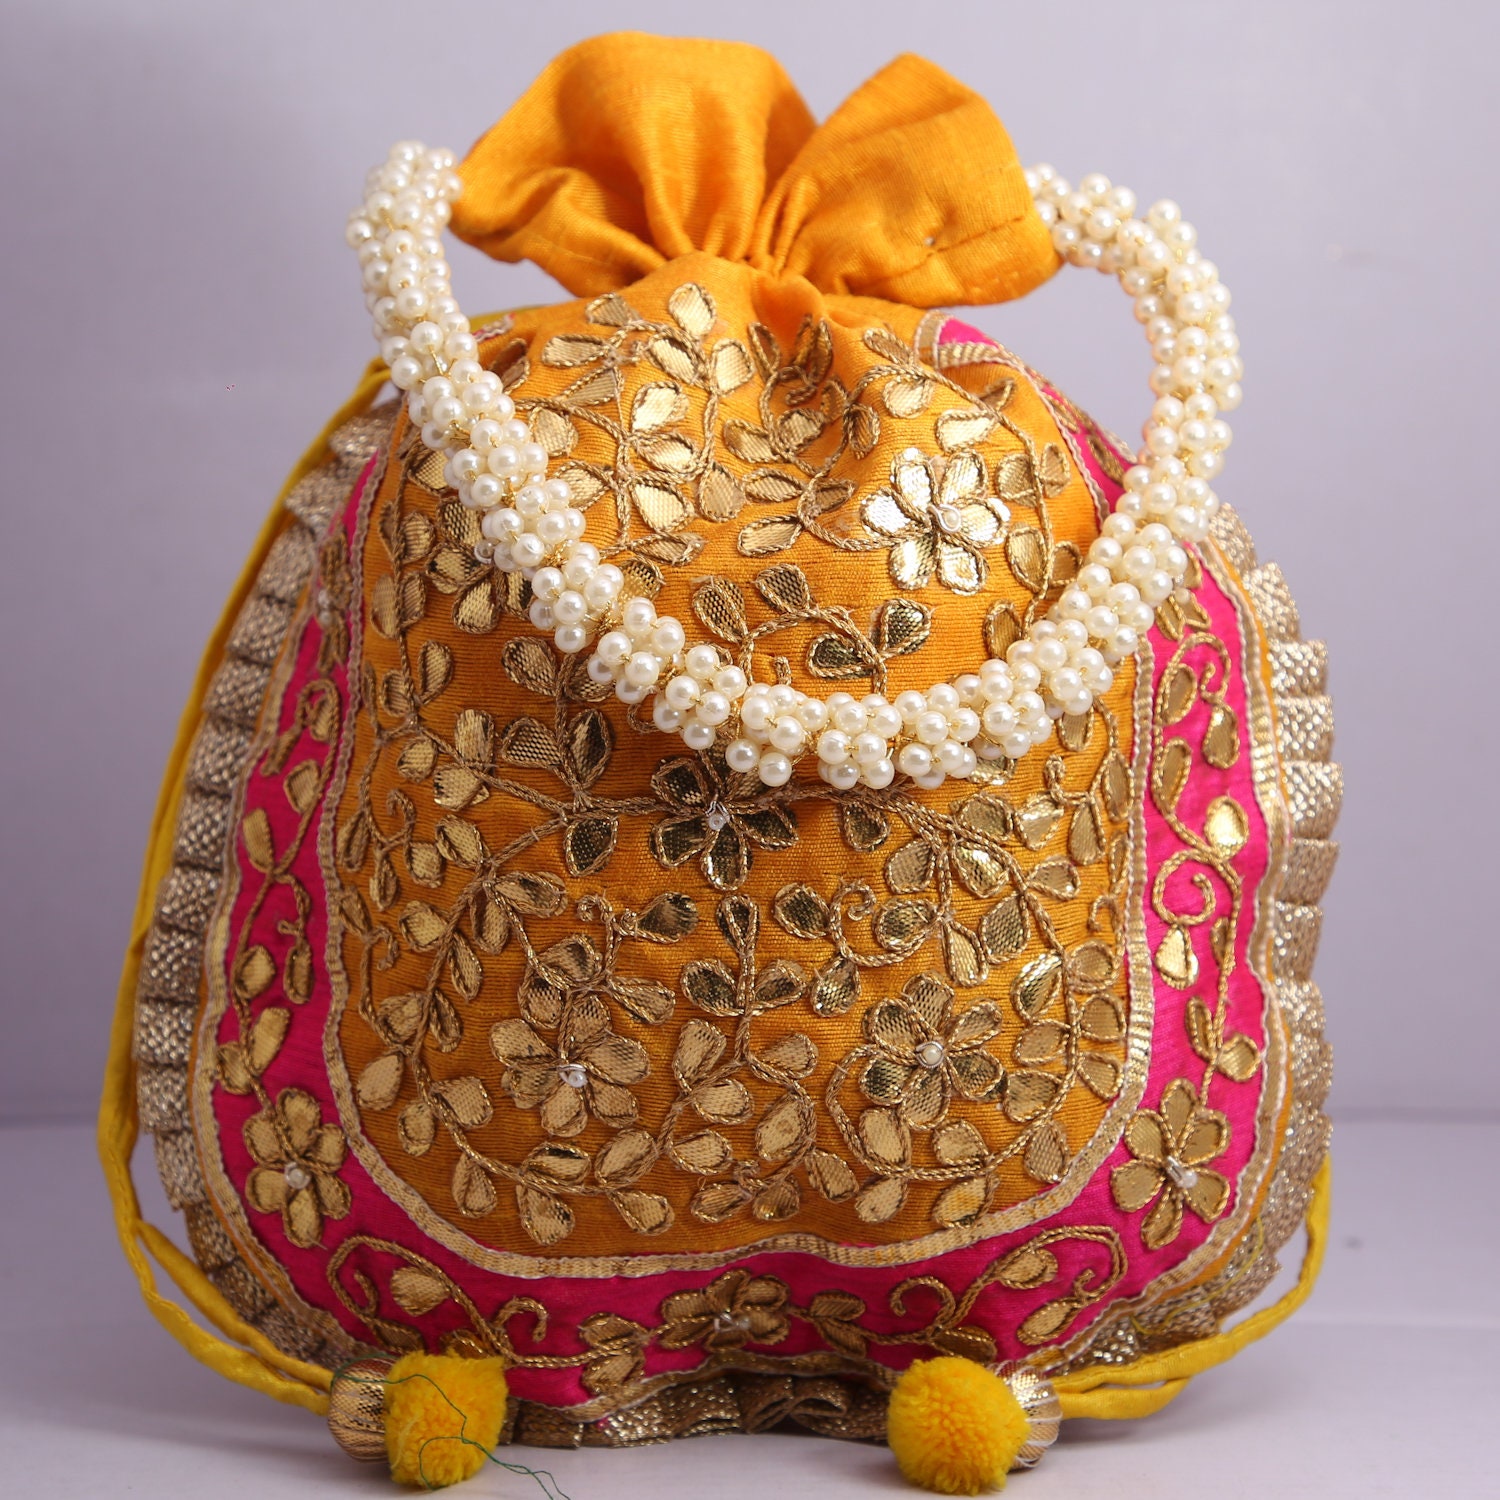 Heart Home Hand Bag|Sequins Silk Embroidery Purse|Traditional Indian Handmade Shoulder Bag with Golden Handle (Pink)